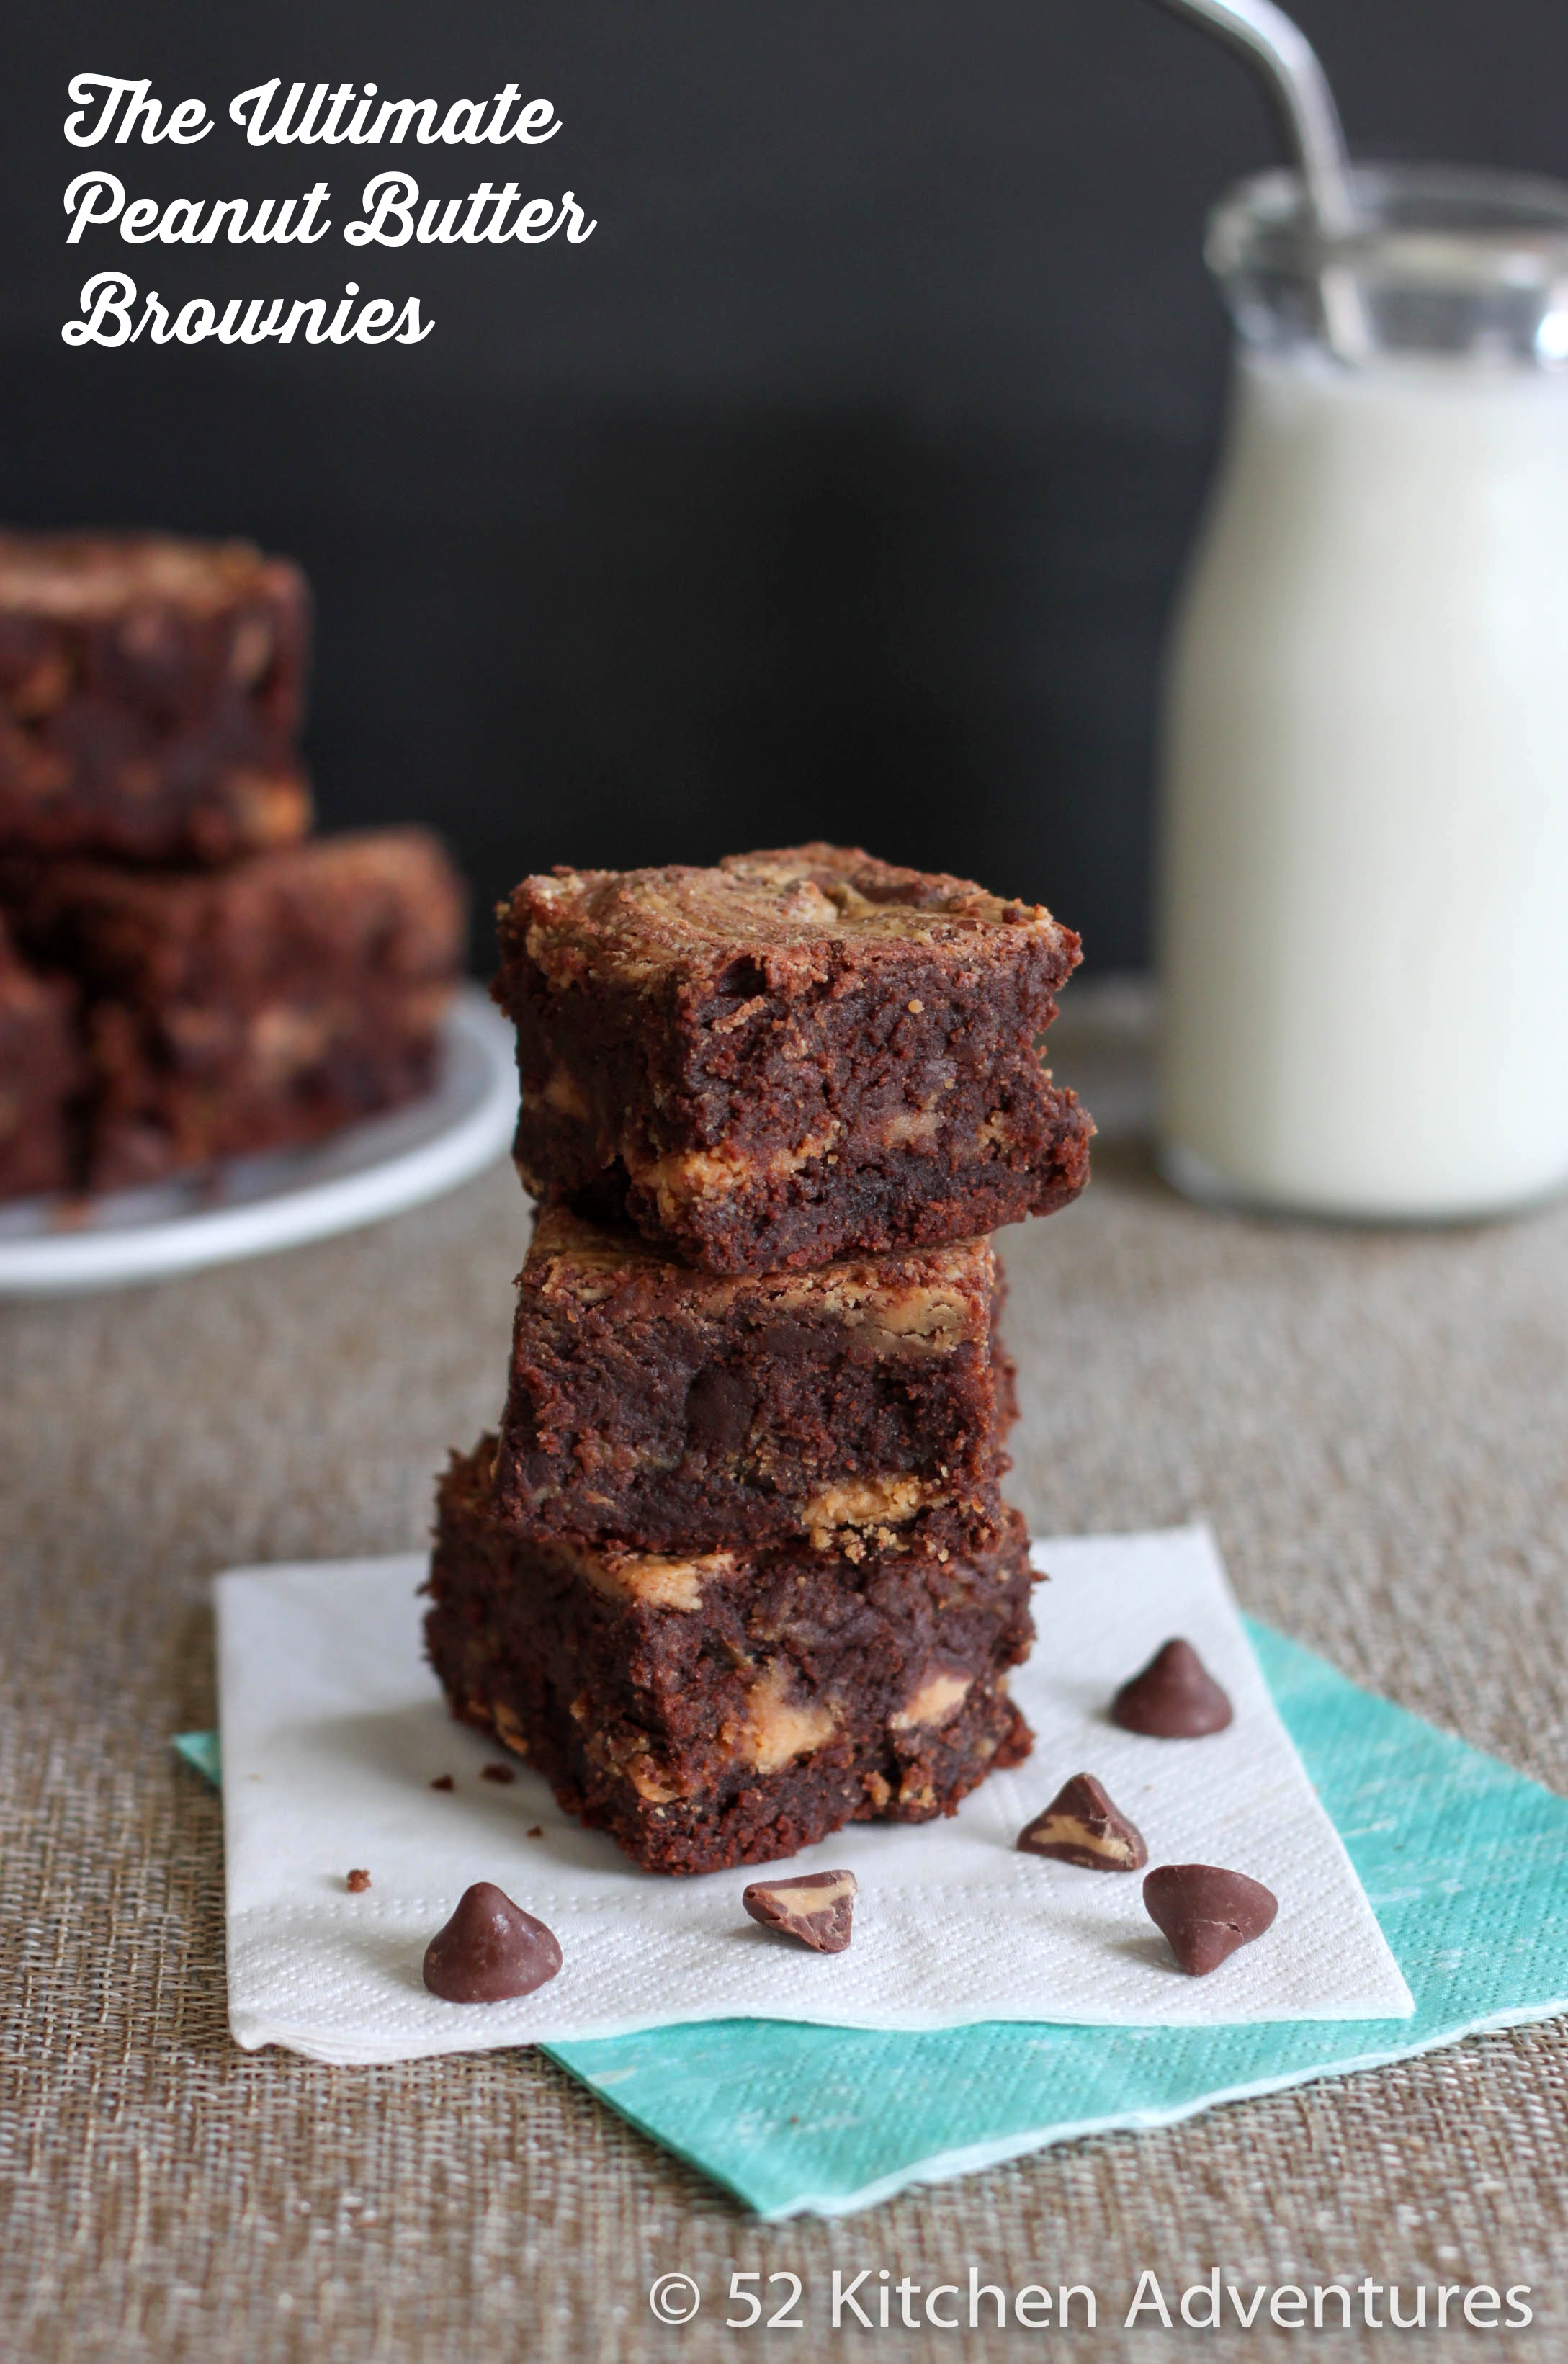 The Ultimate Peanut Butter Brownies